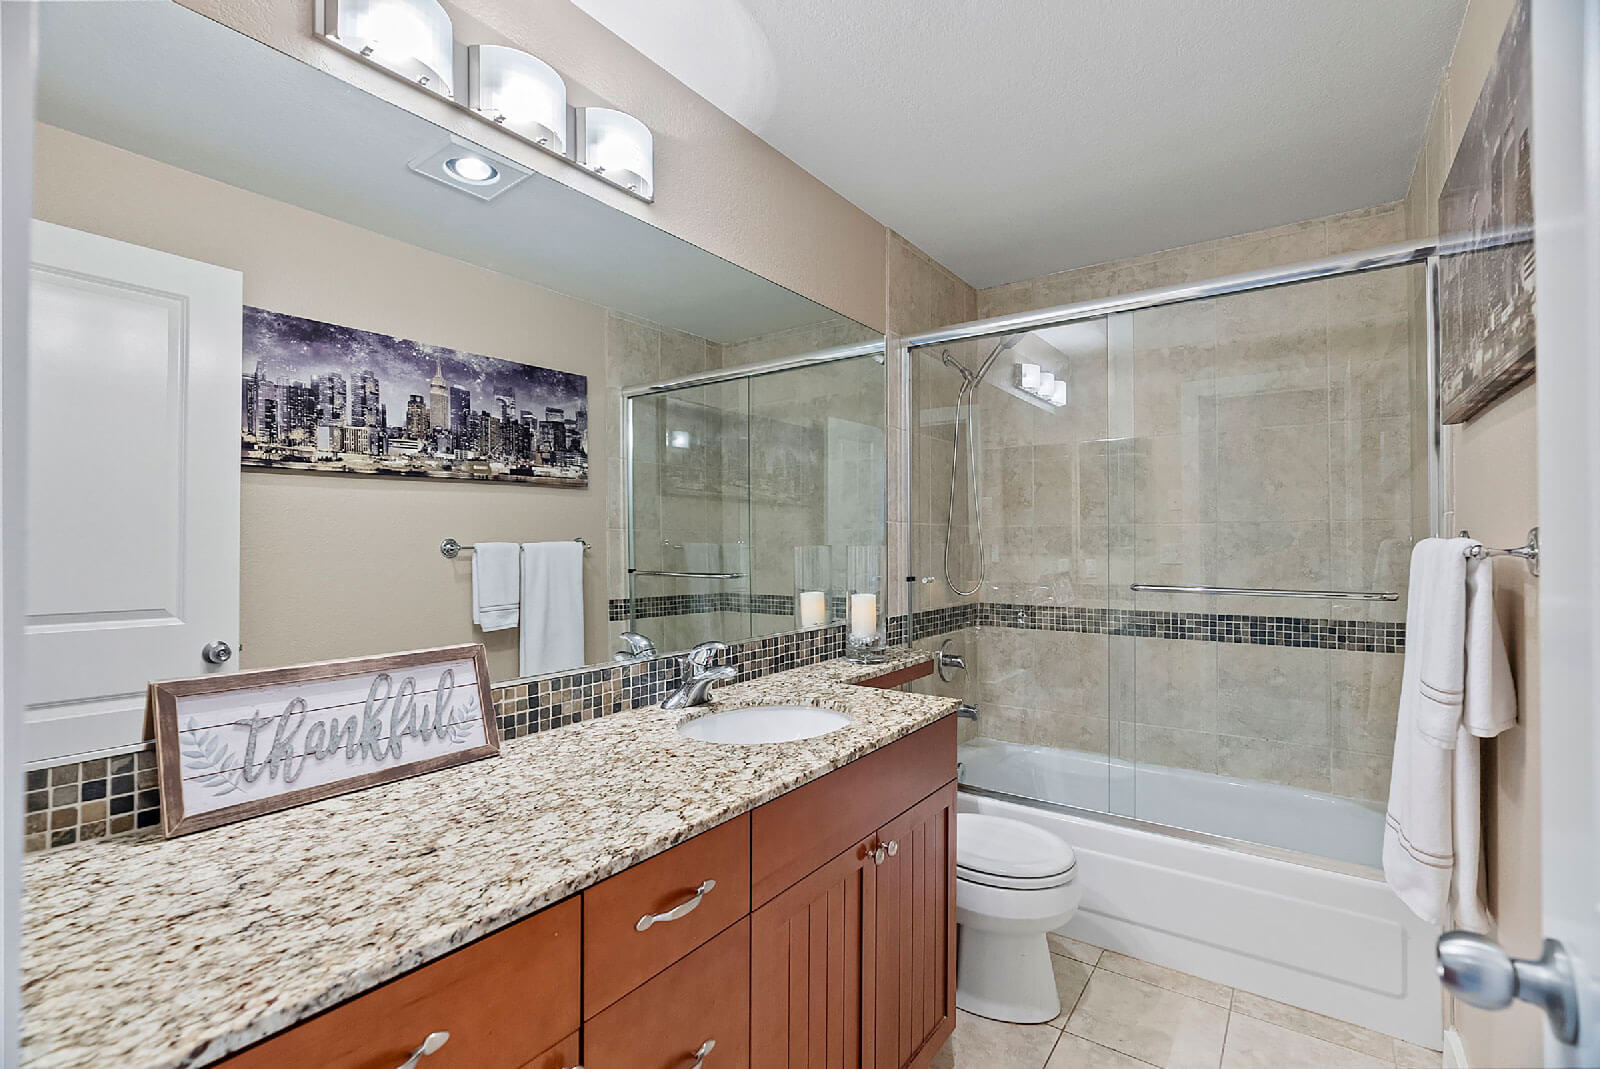 Hall bathroom with granite topped vanity and tub/shower